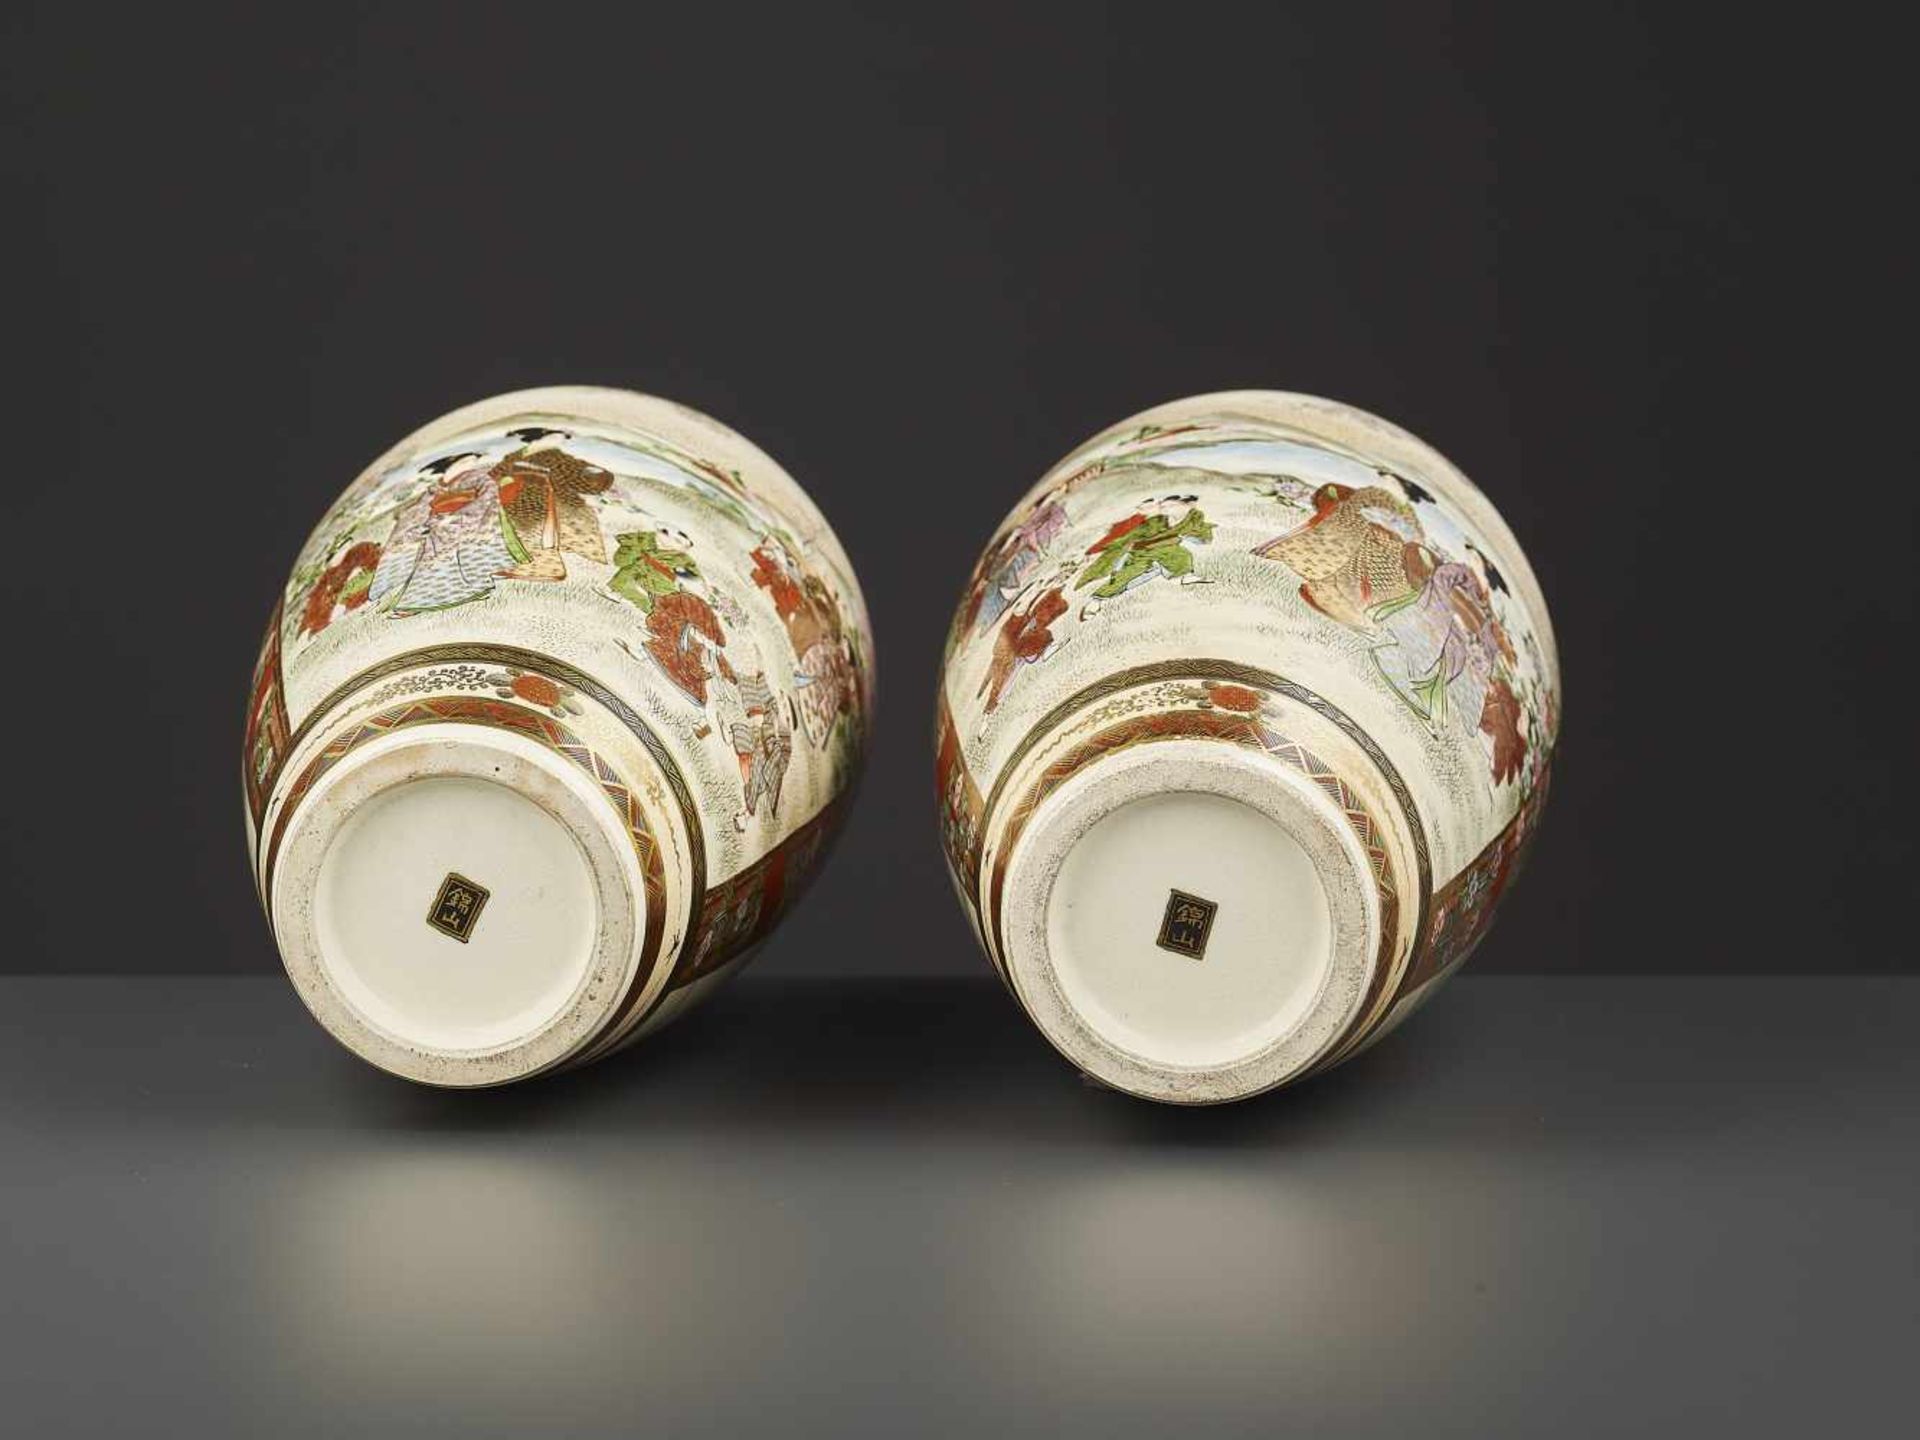 A FINE PAIR OF KINZAN VASES Japan, Meiji period (1868-1912). Each with a Kinzan seal mark painted in - Image 13 of 13